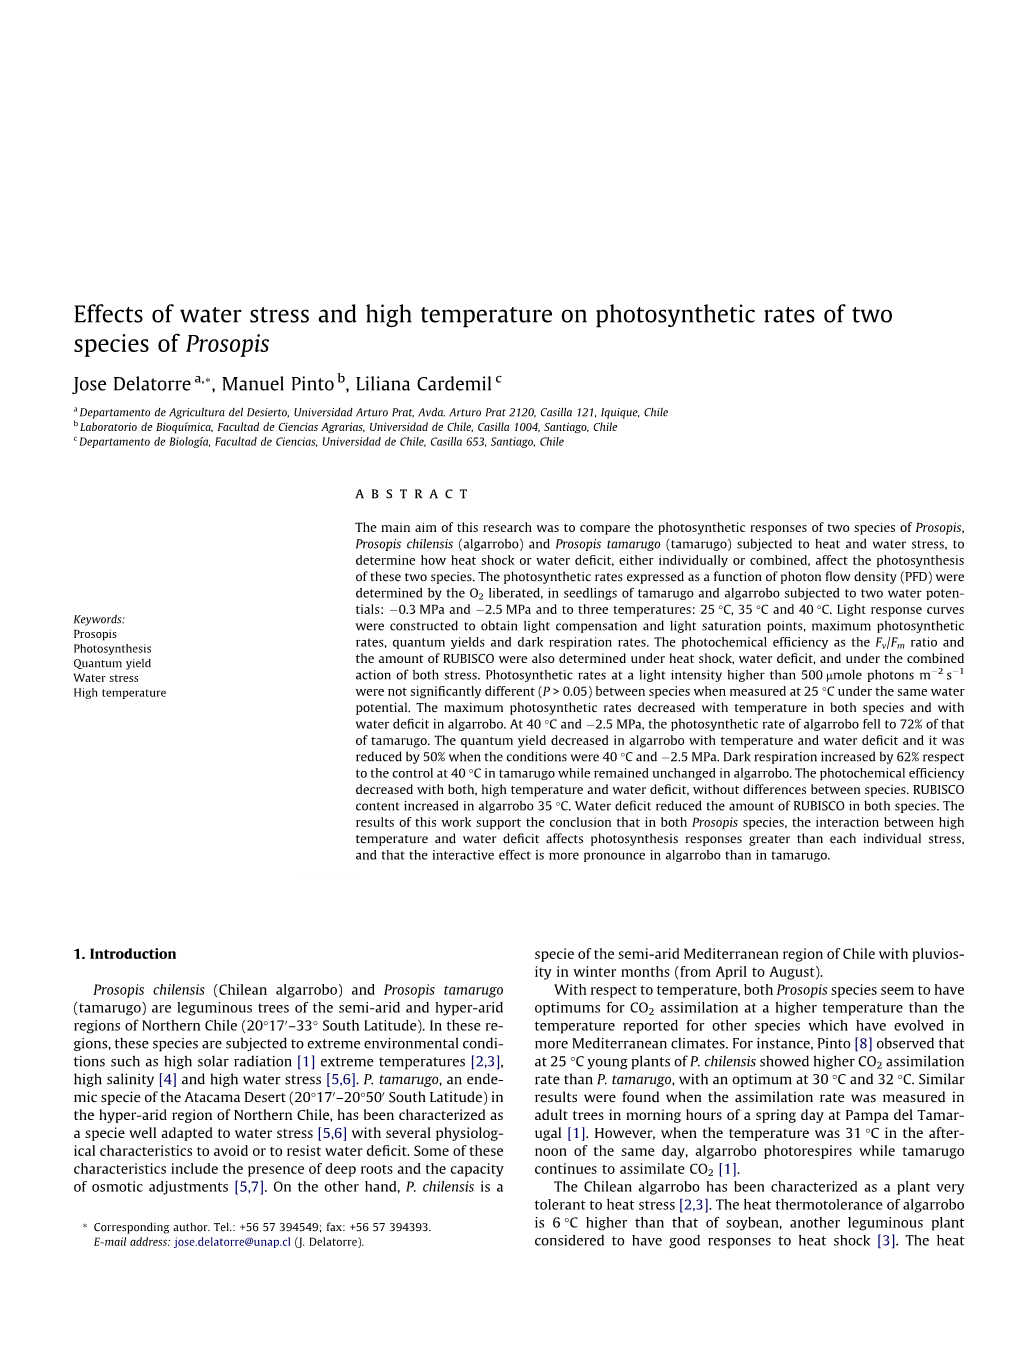 Effects of Water Stress and High Temperature on Photosynthetic Rates of Two Species of Prosopis